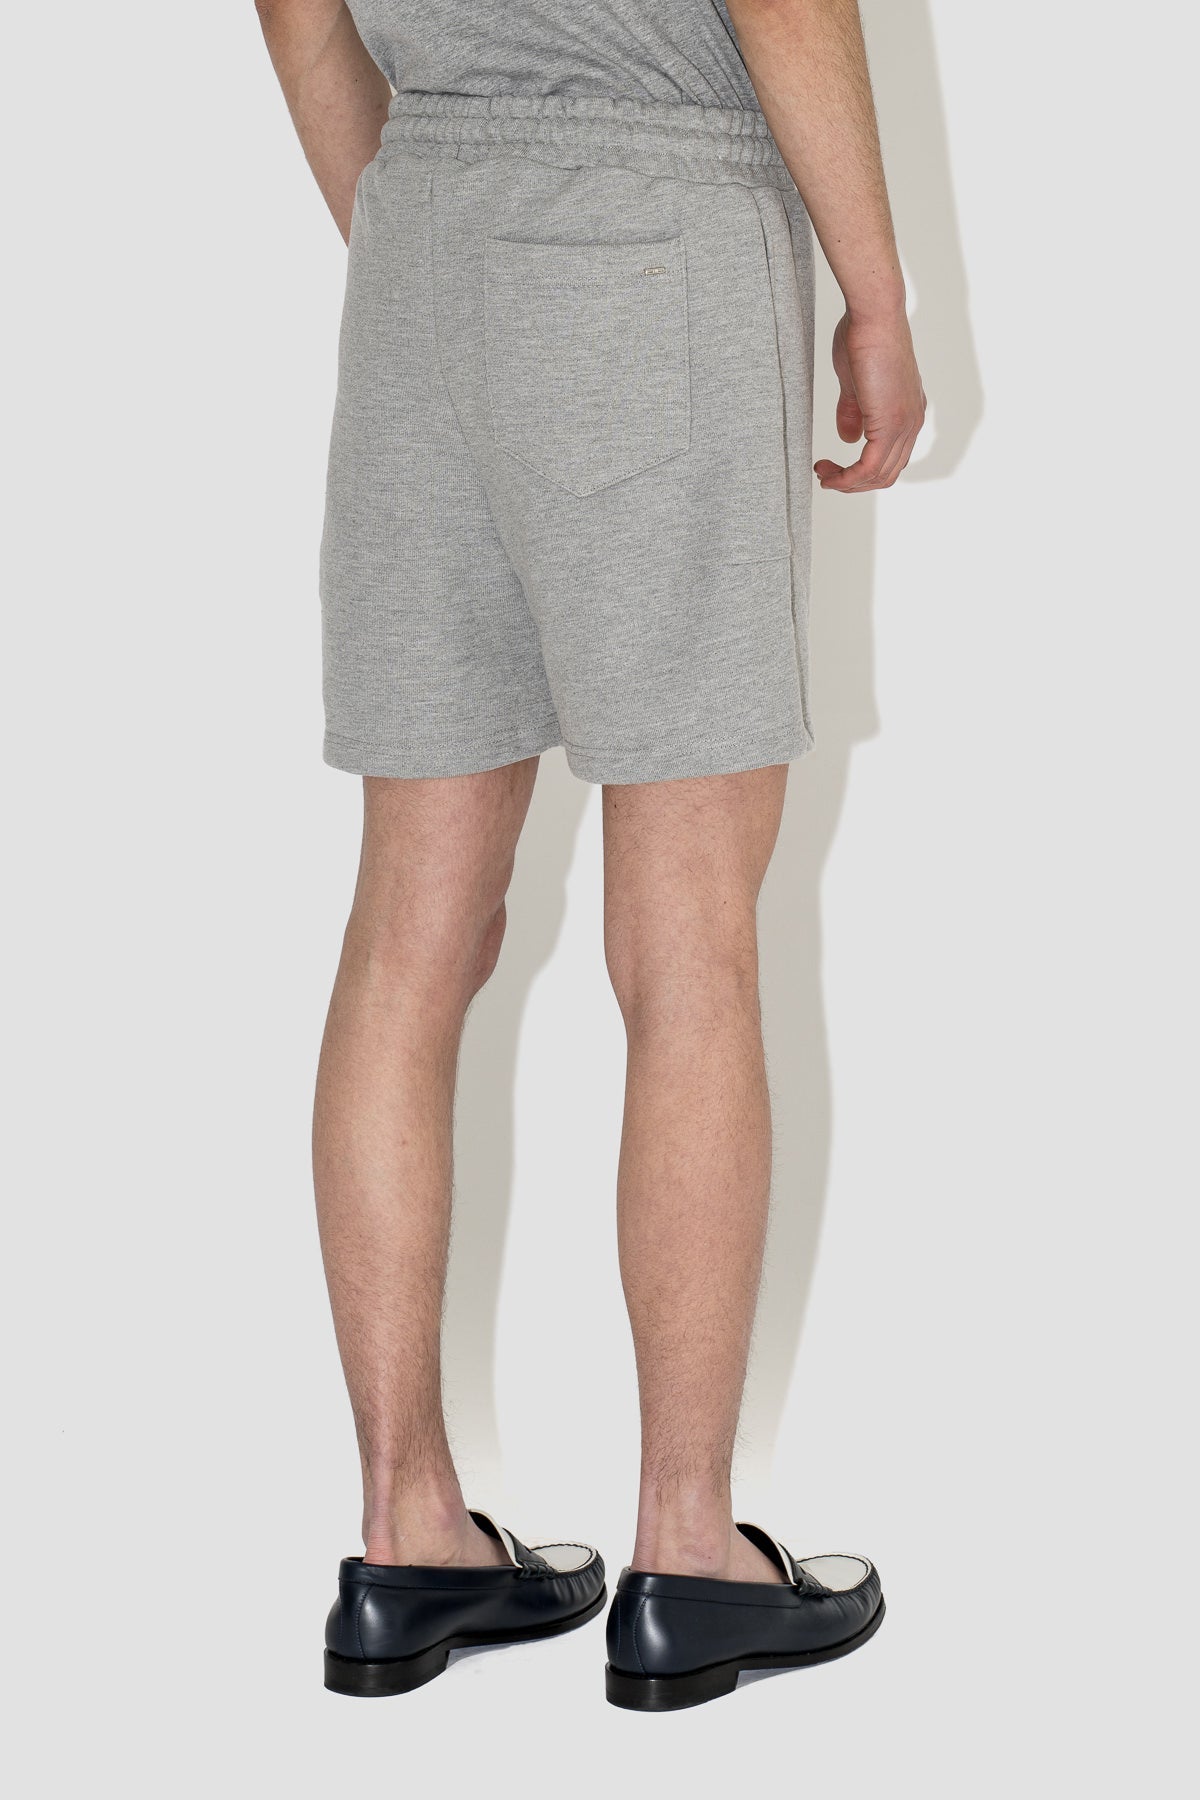 Embroidered Signature Shorts in Heather Grey